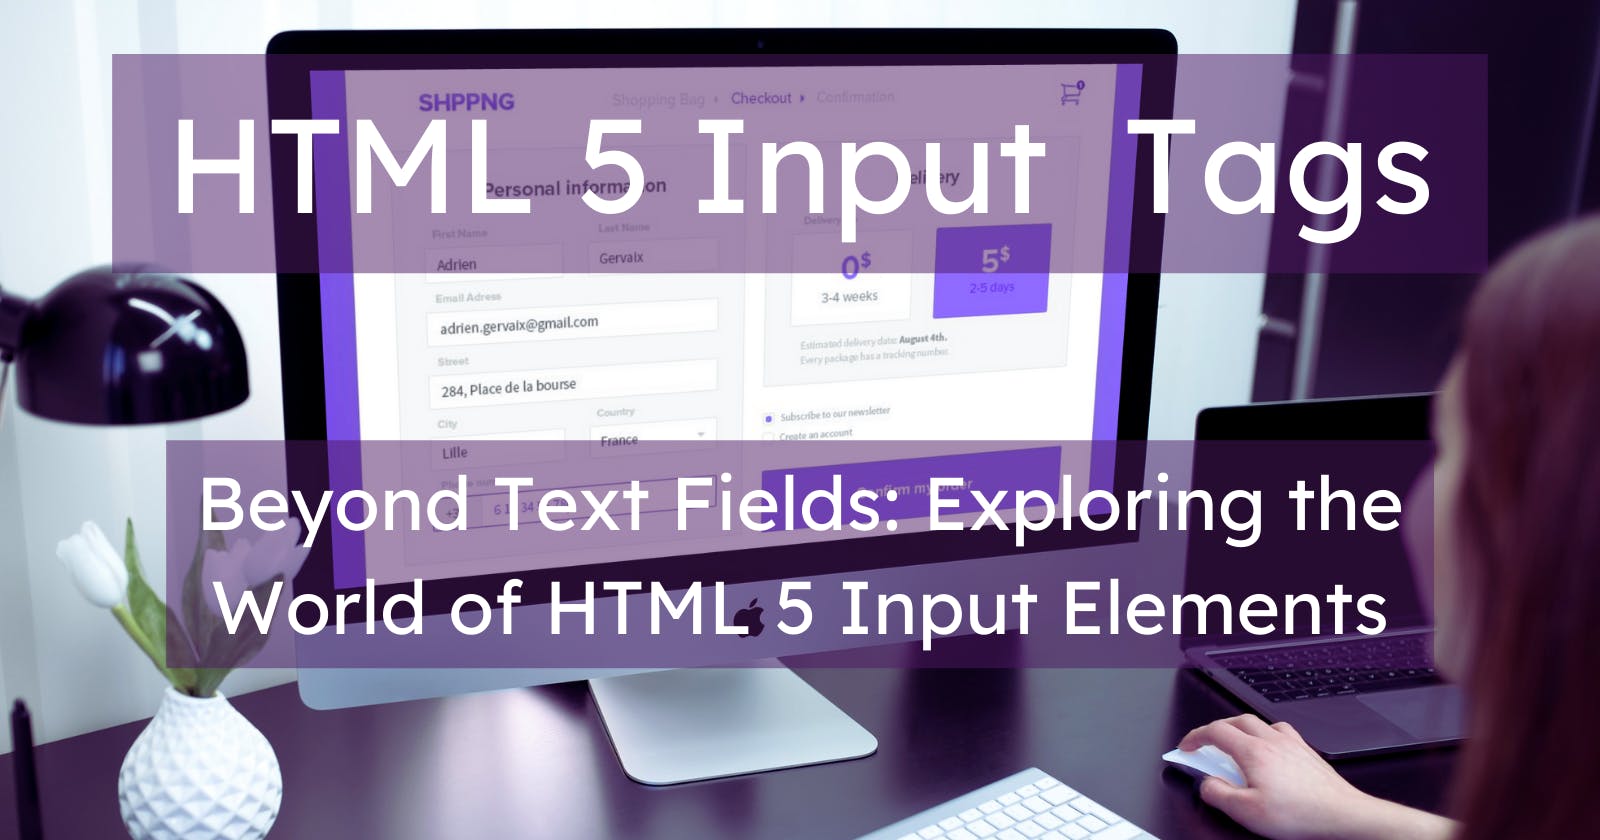 Beyond Text Fields: Exploring the World of HTML 5 Input Elements